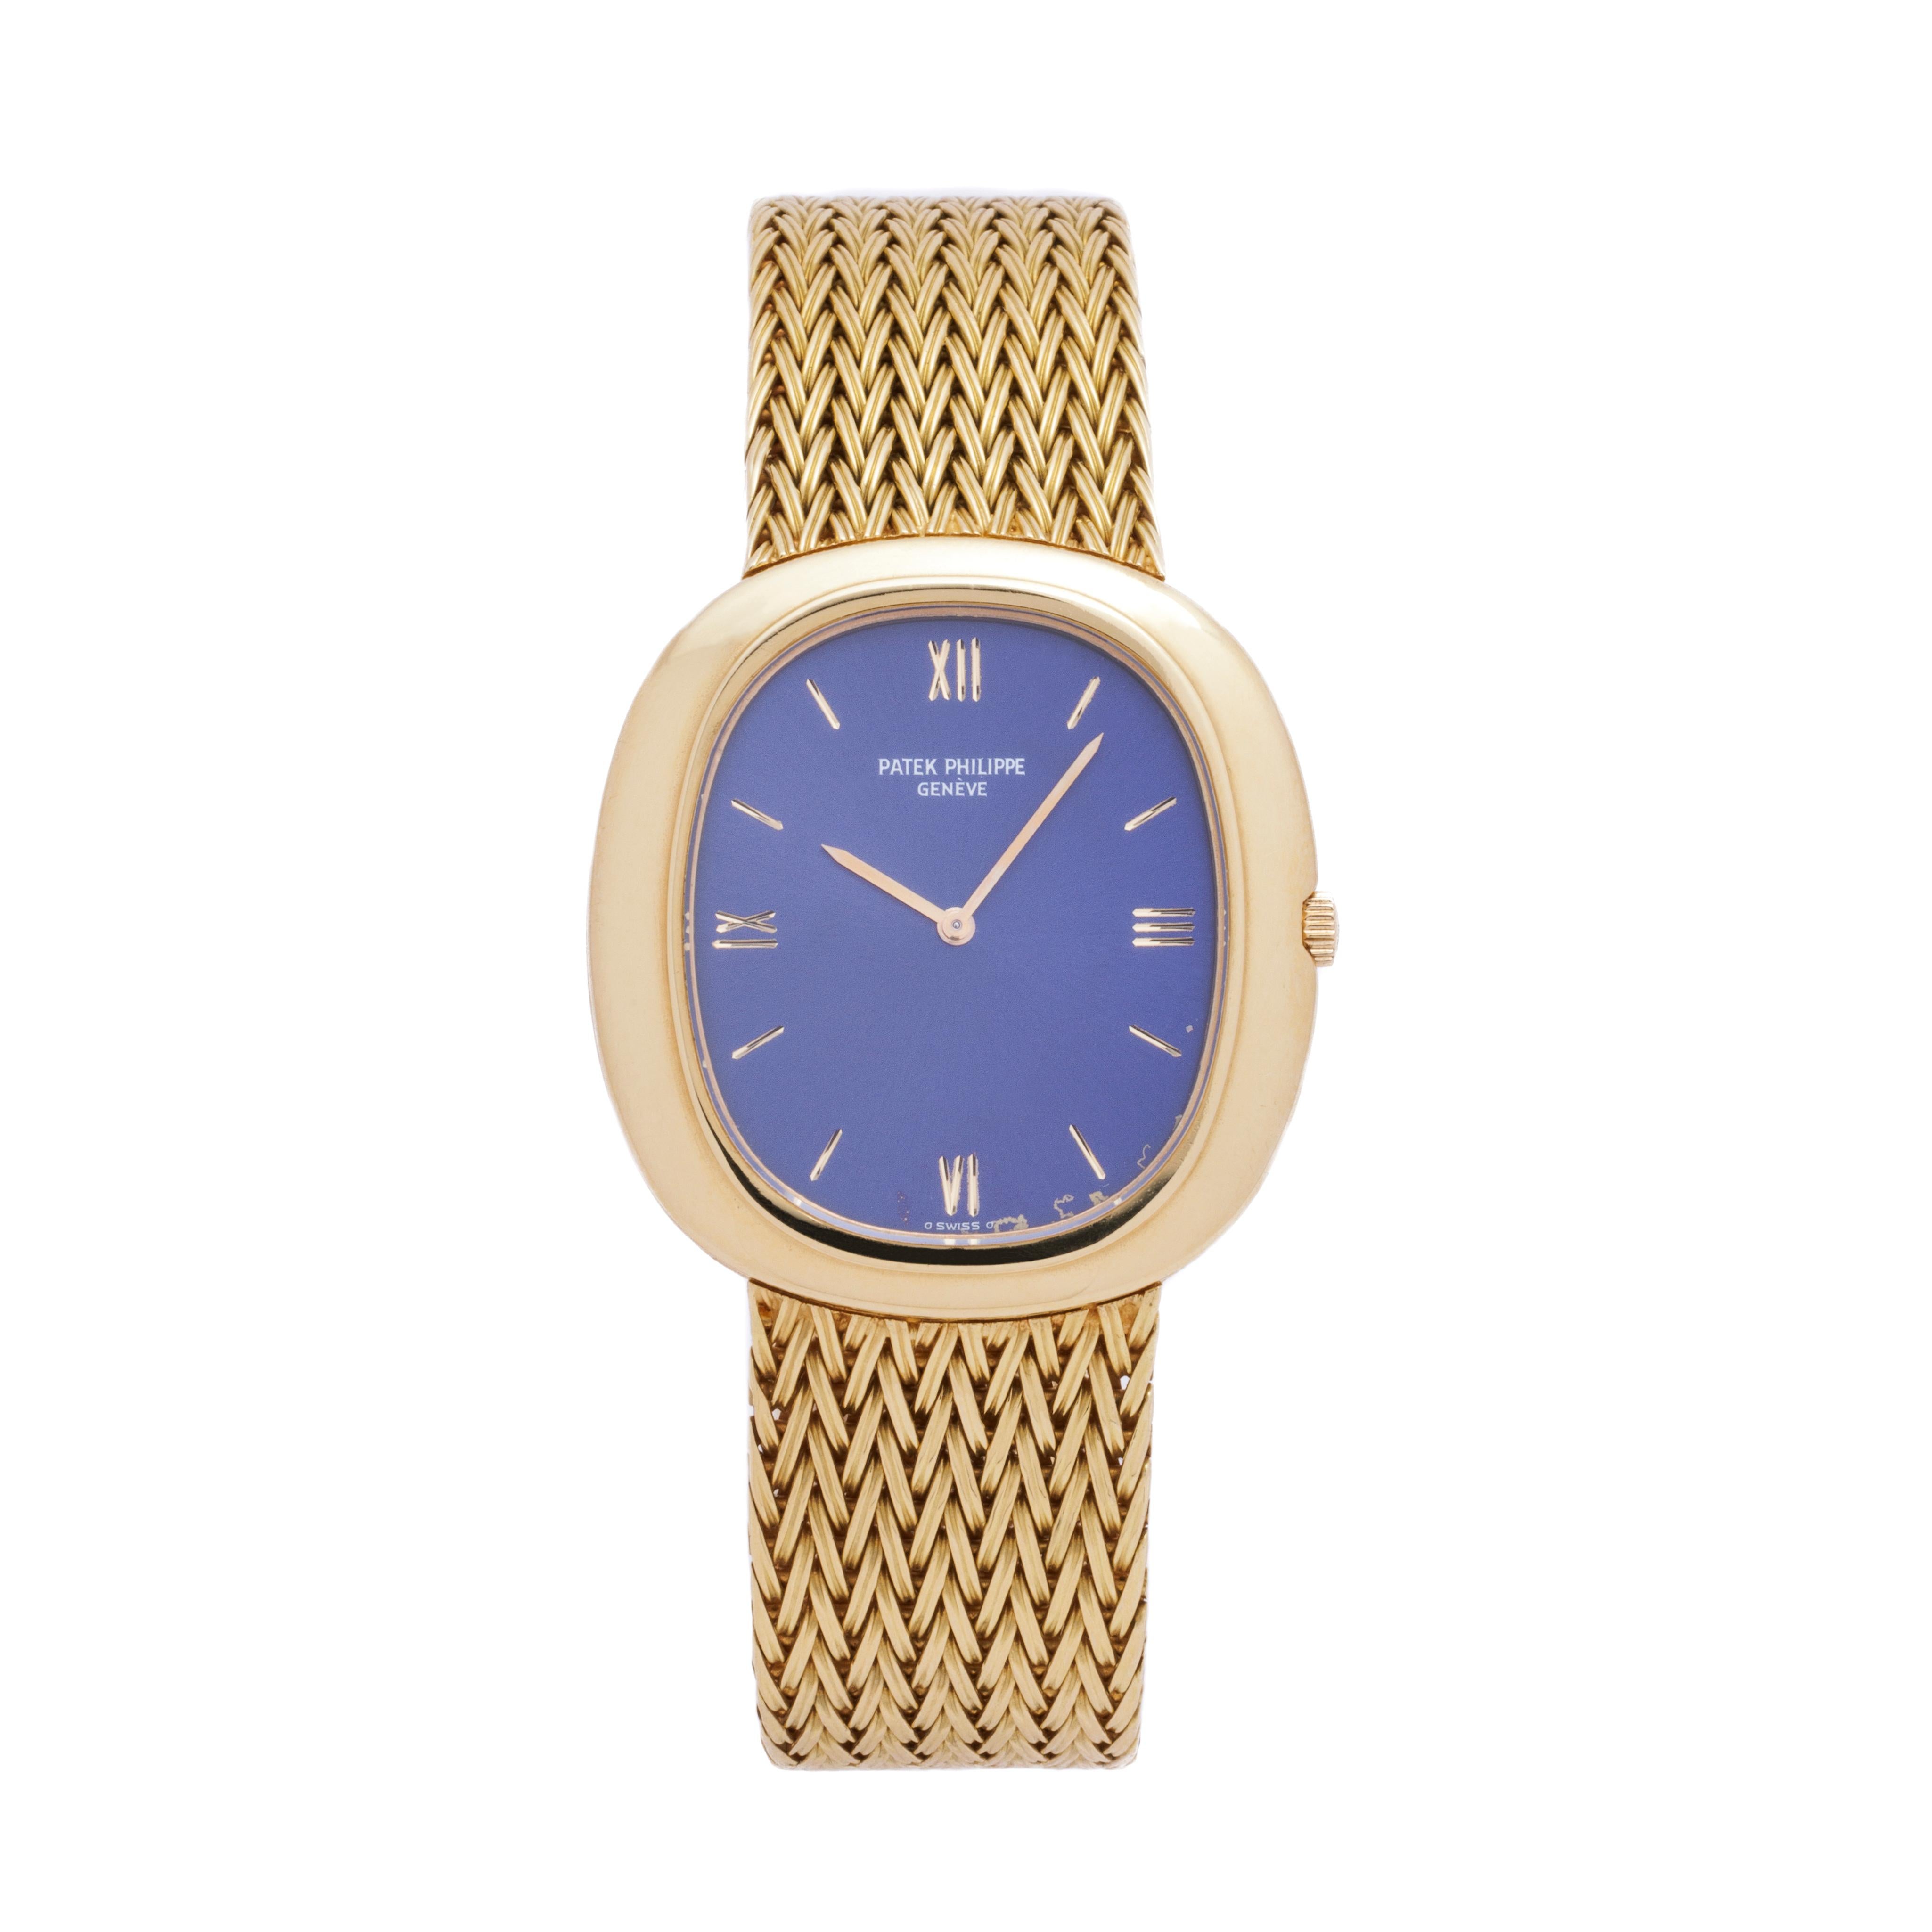 Patek Philippe Ellipse Model 3589 Automatic

Maker: Patek Philippe
Model: 3589 Ellipse
Year: c.1970
Material: 18K Yellow Gold
Dial: Carved Lapis Lazuli
Movement: Automatic
Case Measurement: H 3.5cm x 3.4cm
Weight: 94 grams
Size: Fits up to 8 inch